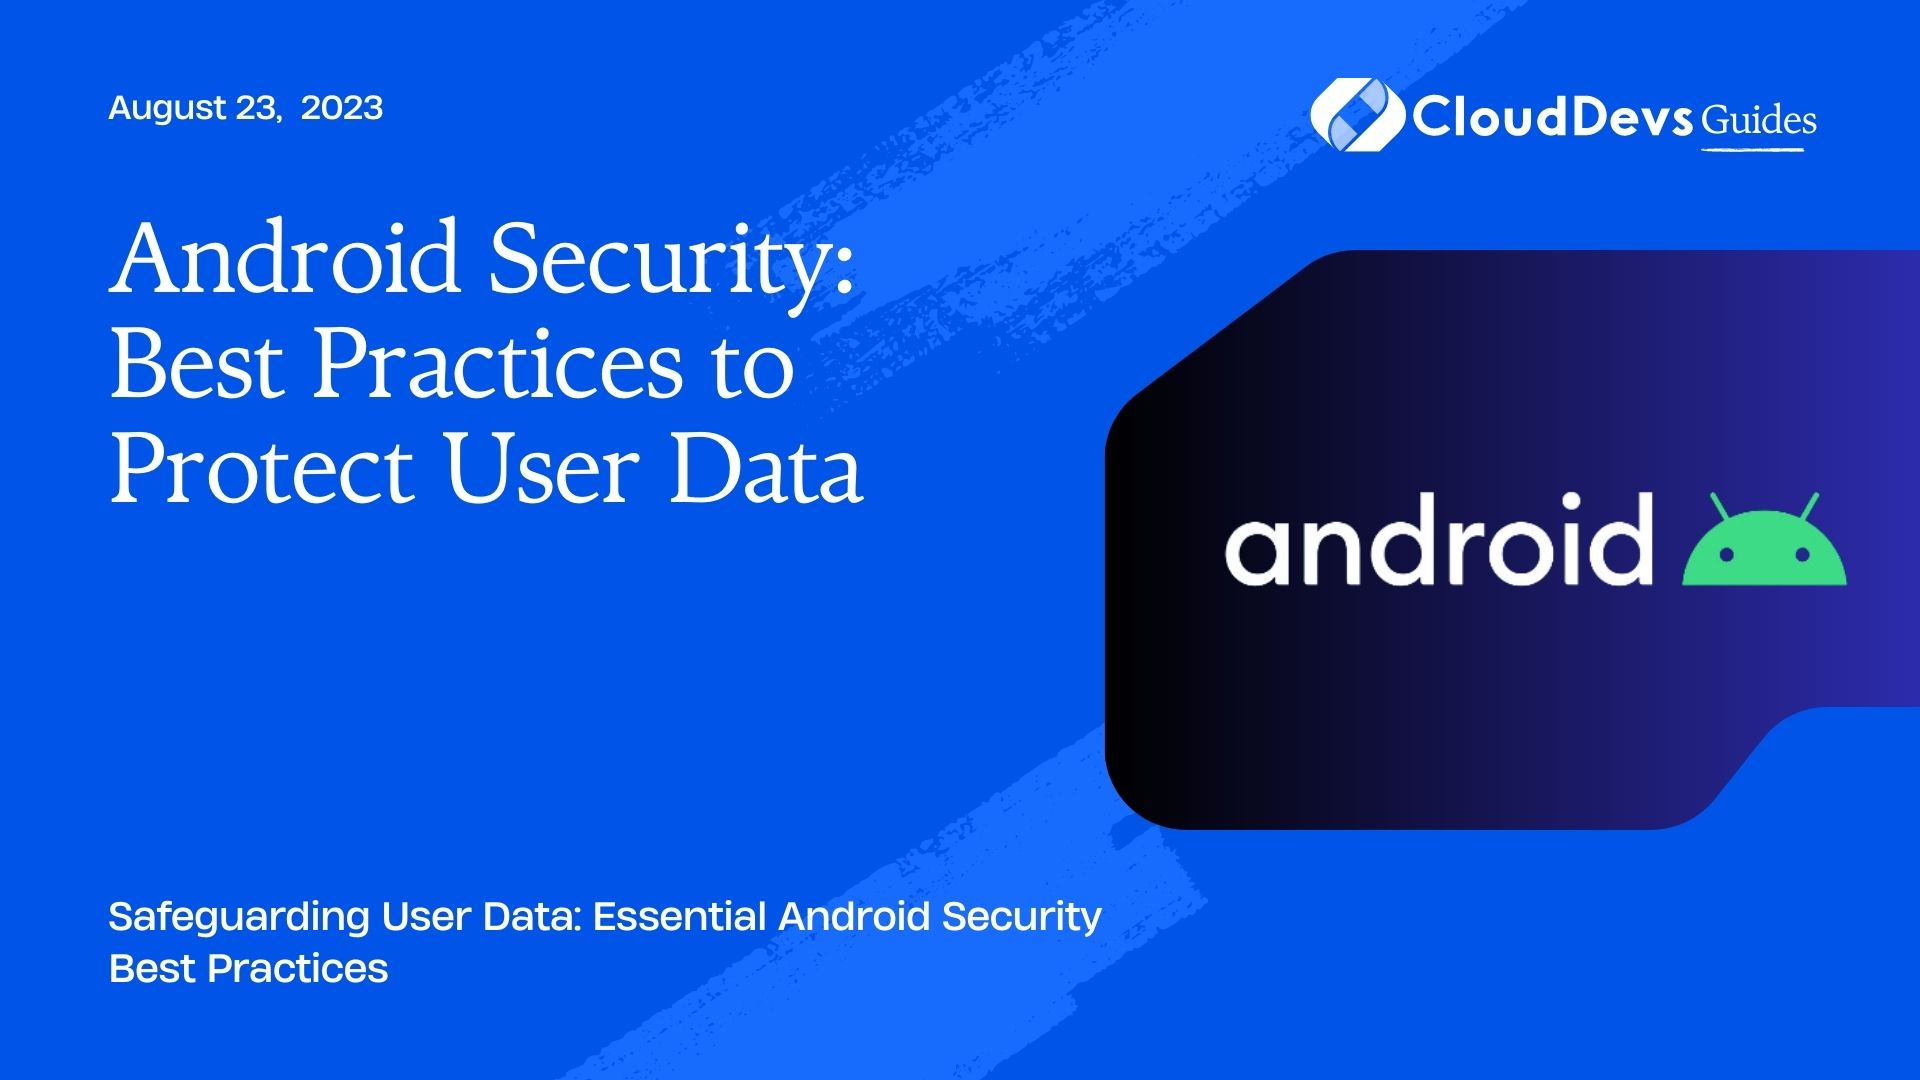 Android Security: Best Practices to Protect User Data